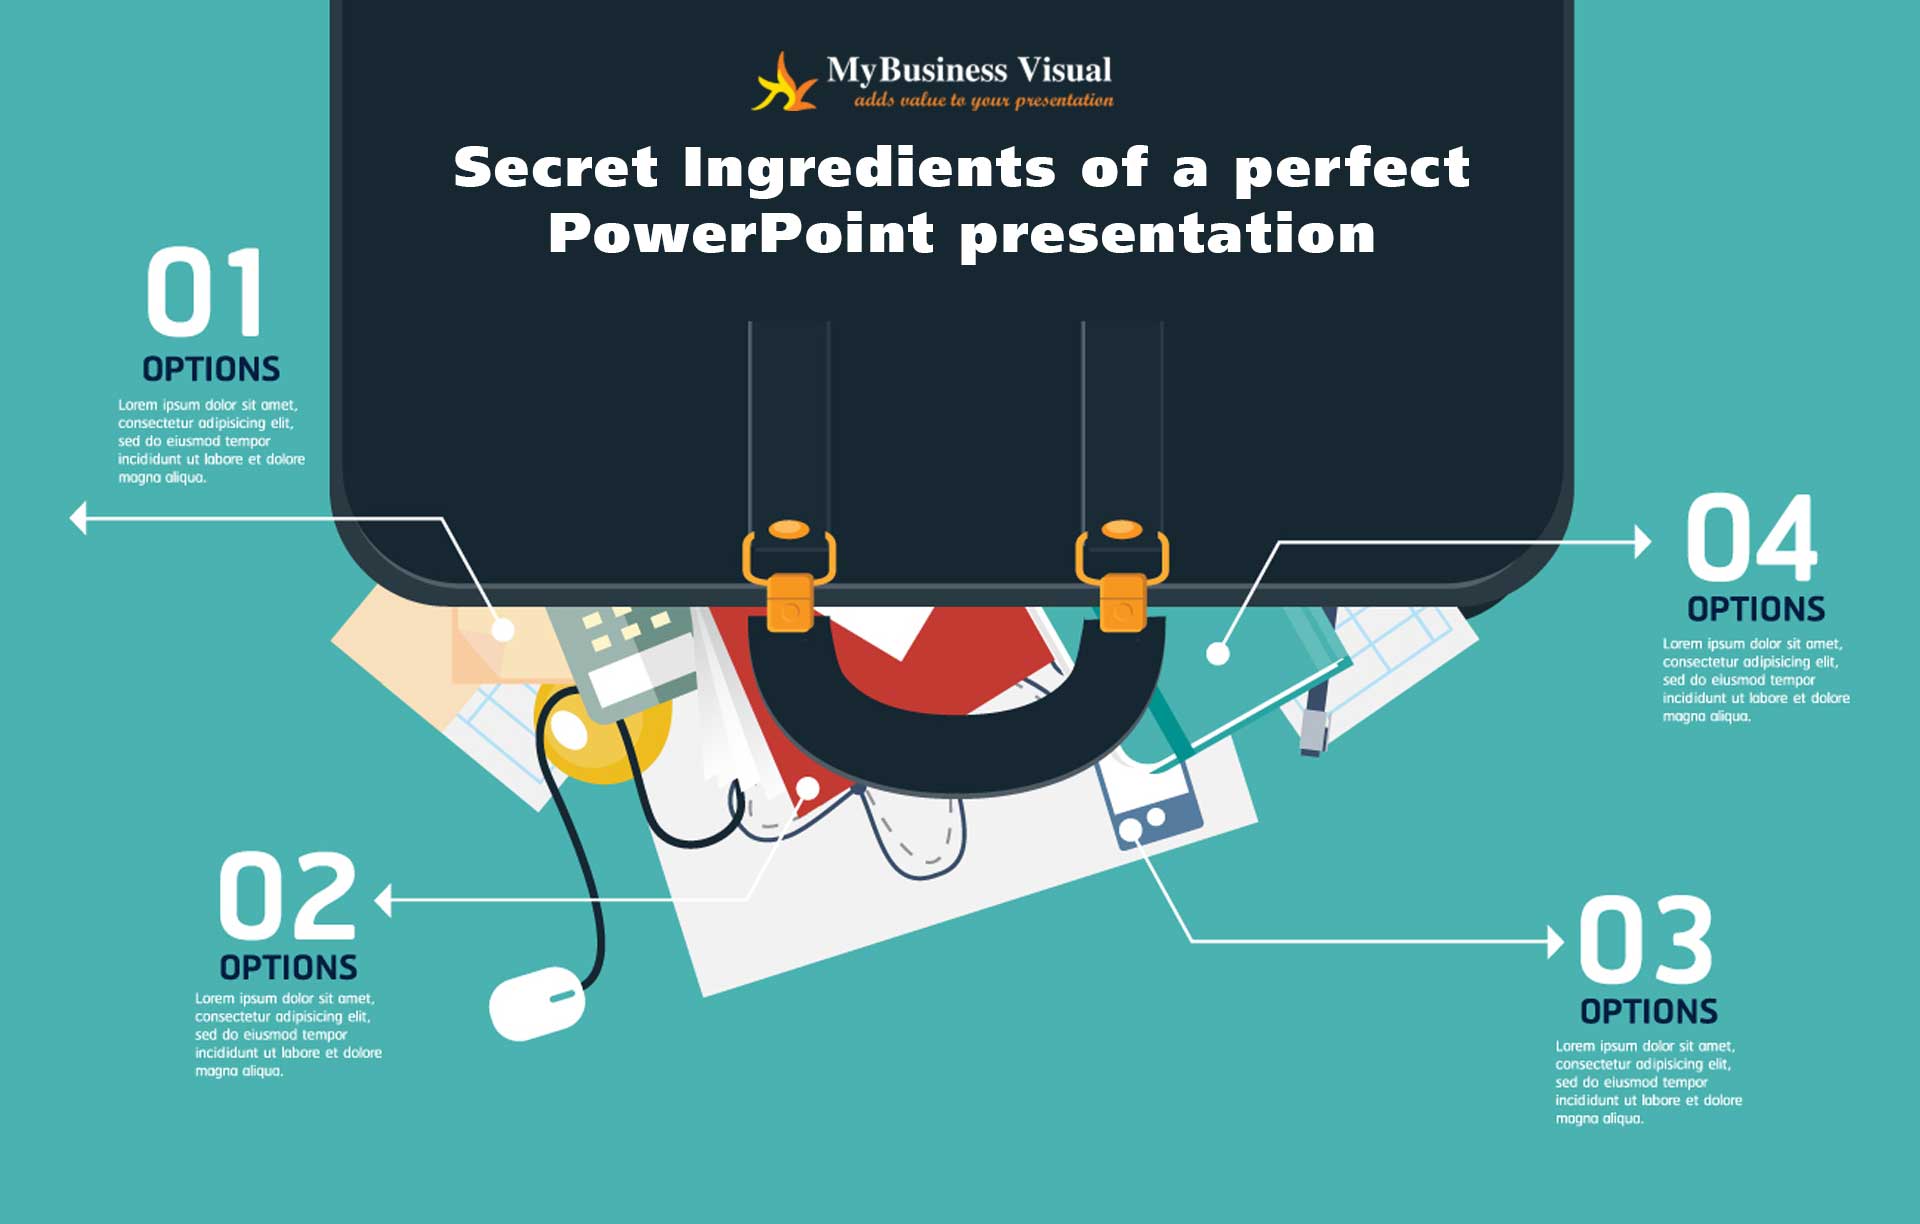 Secret ingredients of a perfect PowerPoint presentation